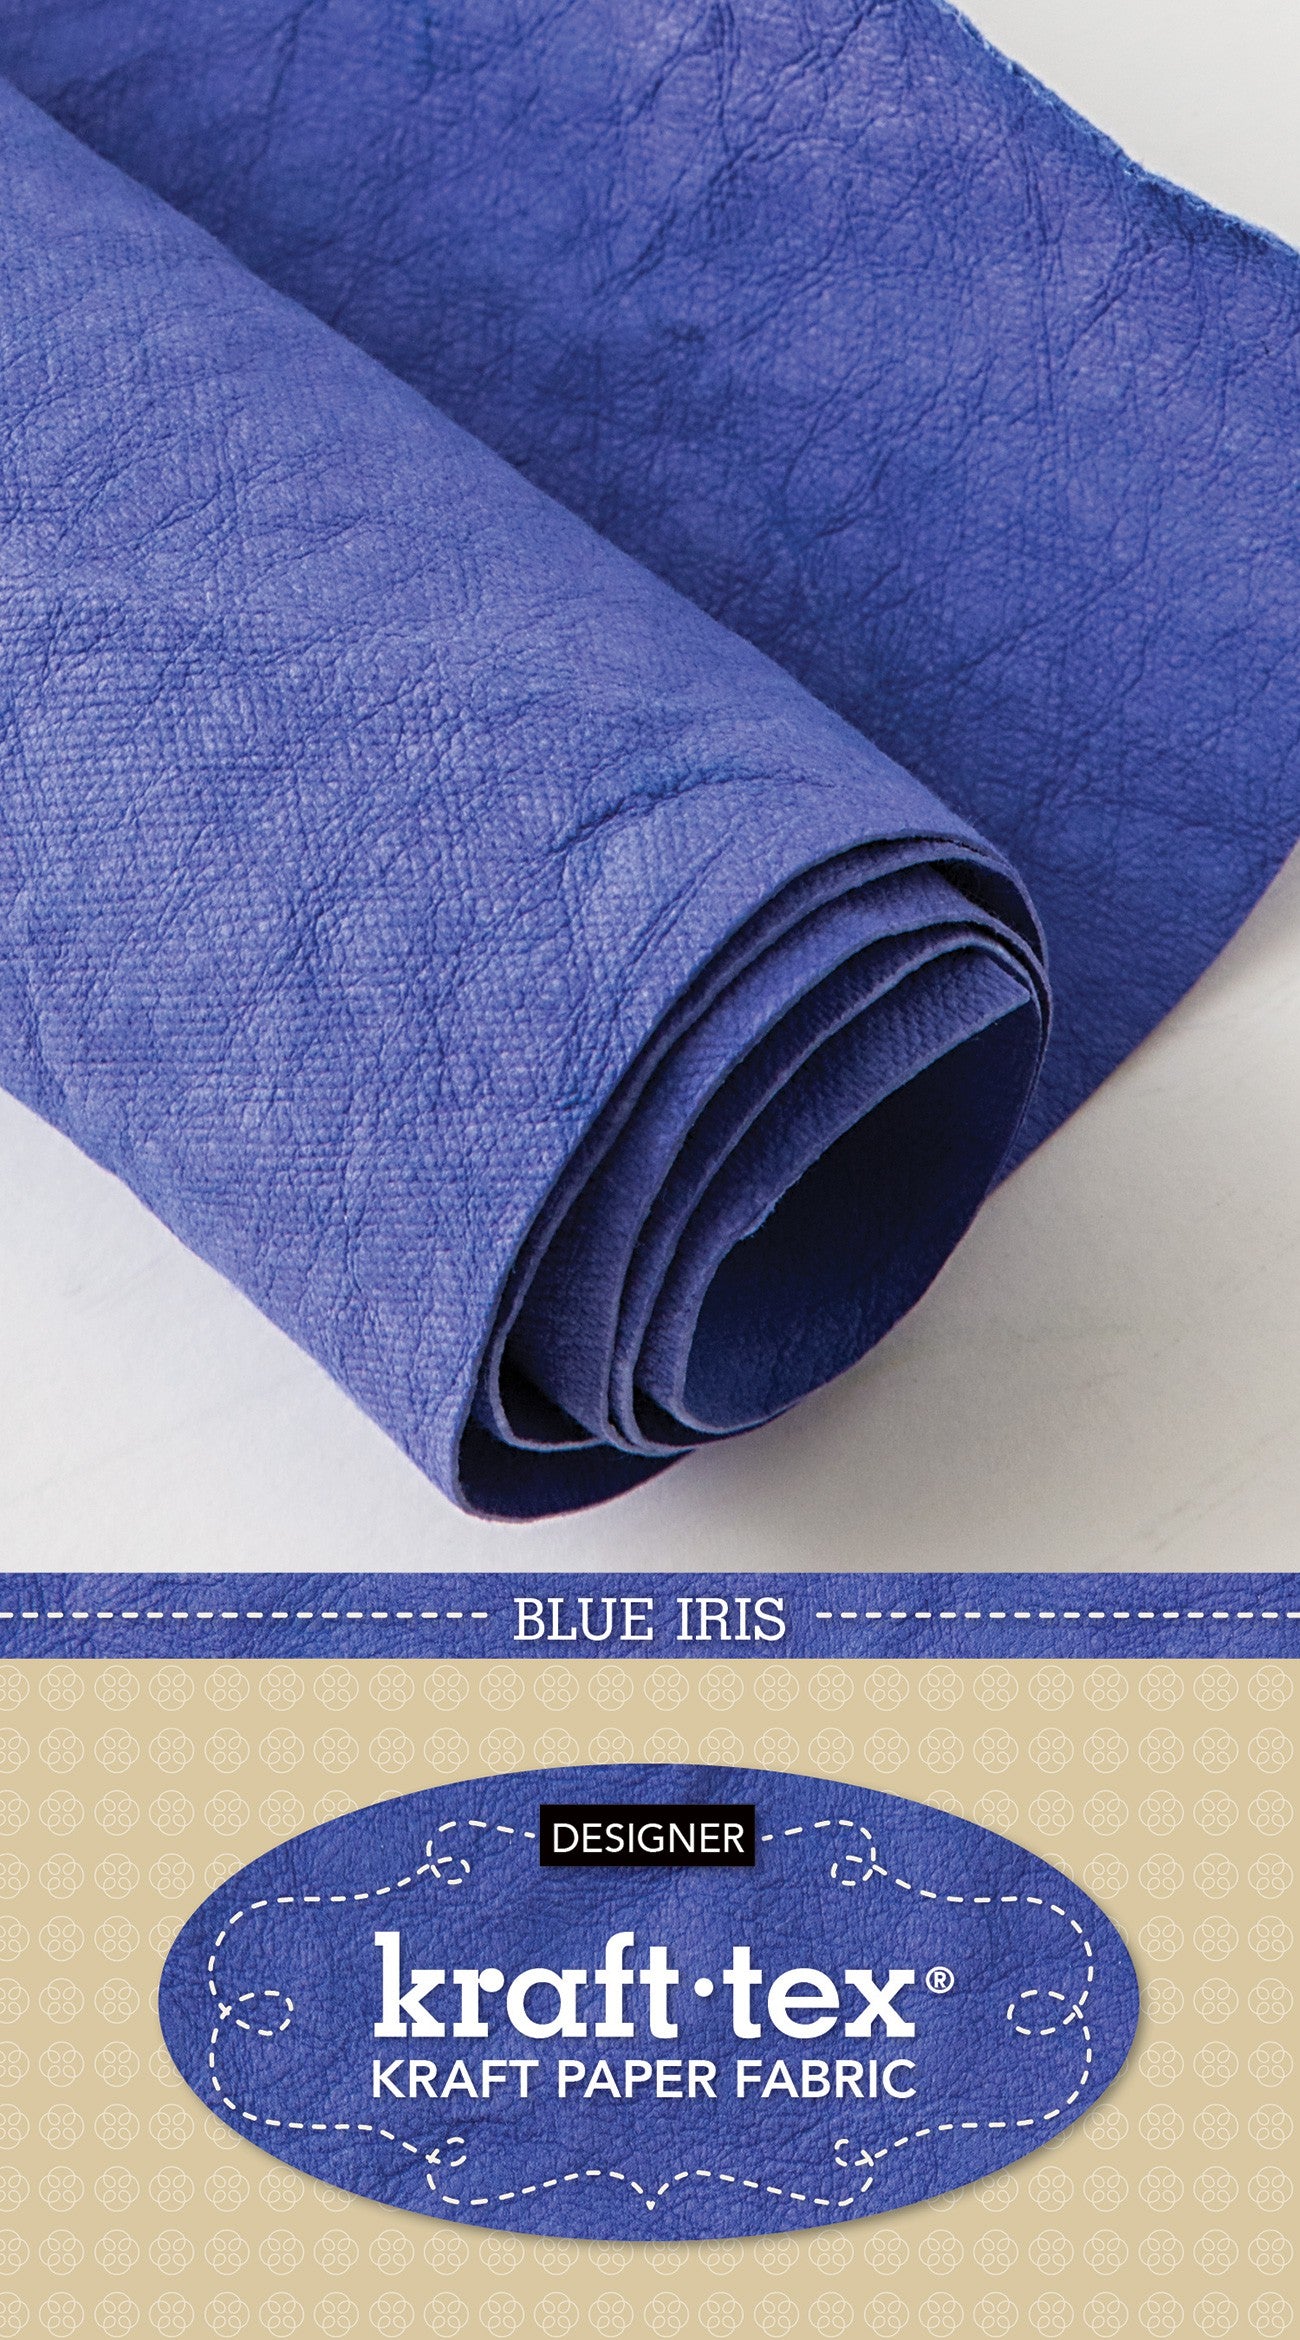 Kraft-Tex Roll, Designer Blue Iris, 18.5 Inches x 28.5 Inches Hand-Dyed Prewashed Paper Fabric